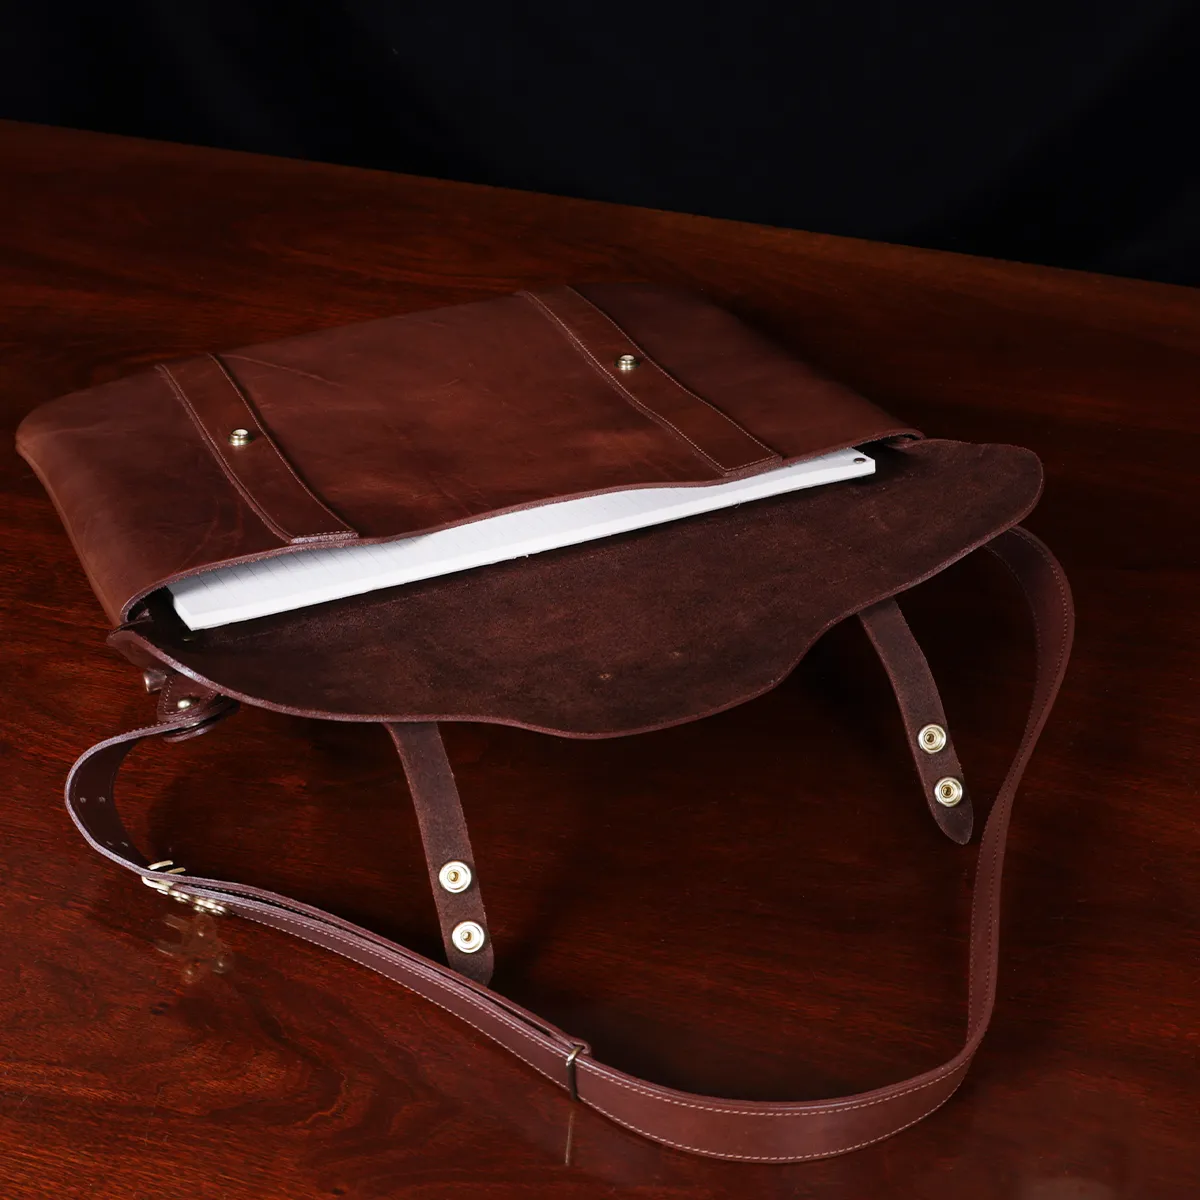 AMERICAN LEATHER CO. Holly Convertible Shoulder Bag